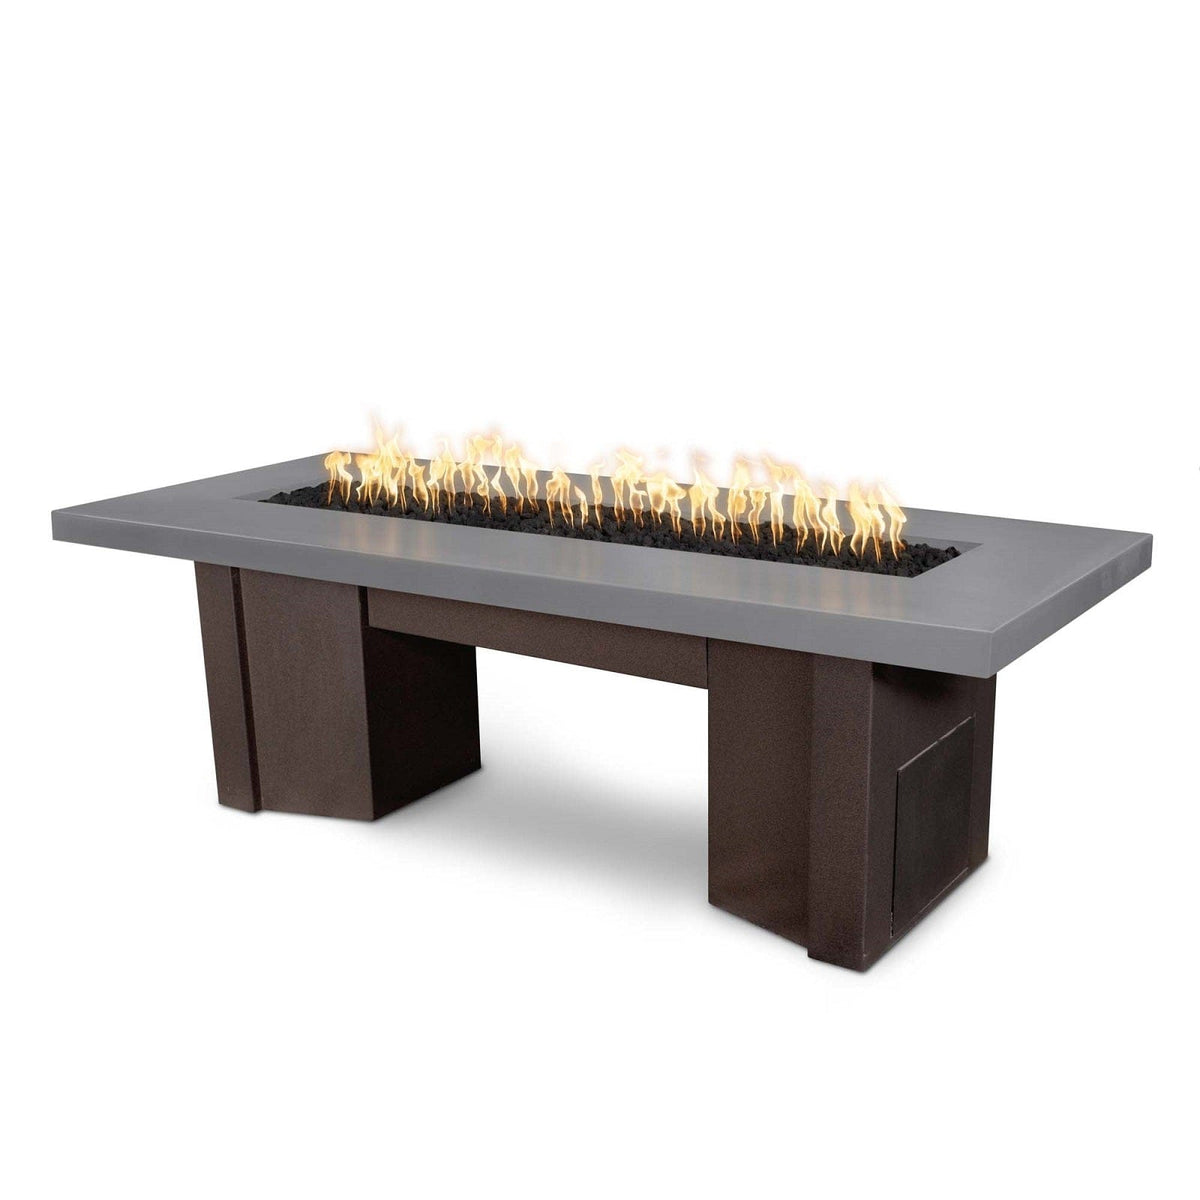 The Outdoor Plus Fire Features Natural Gray (-NGY) / Java Powder Coated Steel (-JAV) The Outdoor Plus 78&quot; Alameda Fire Table Smooth Concrete in Liquid Propane - Match Lit with Flame Sense System / OPT-ALMGFRC78FSML-LP